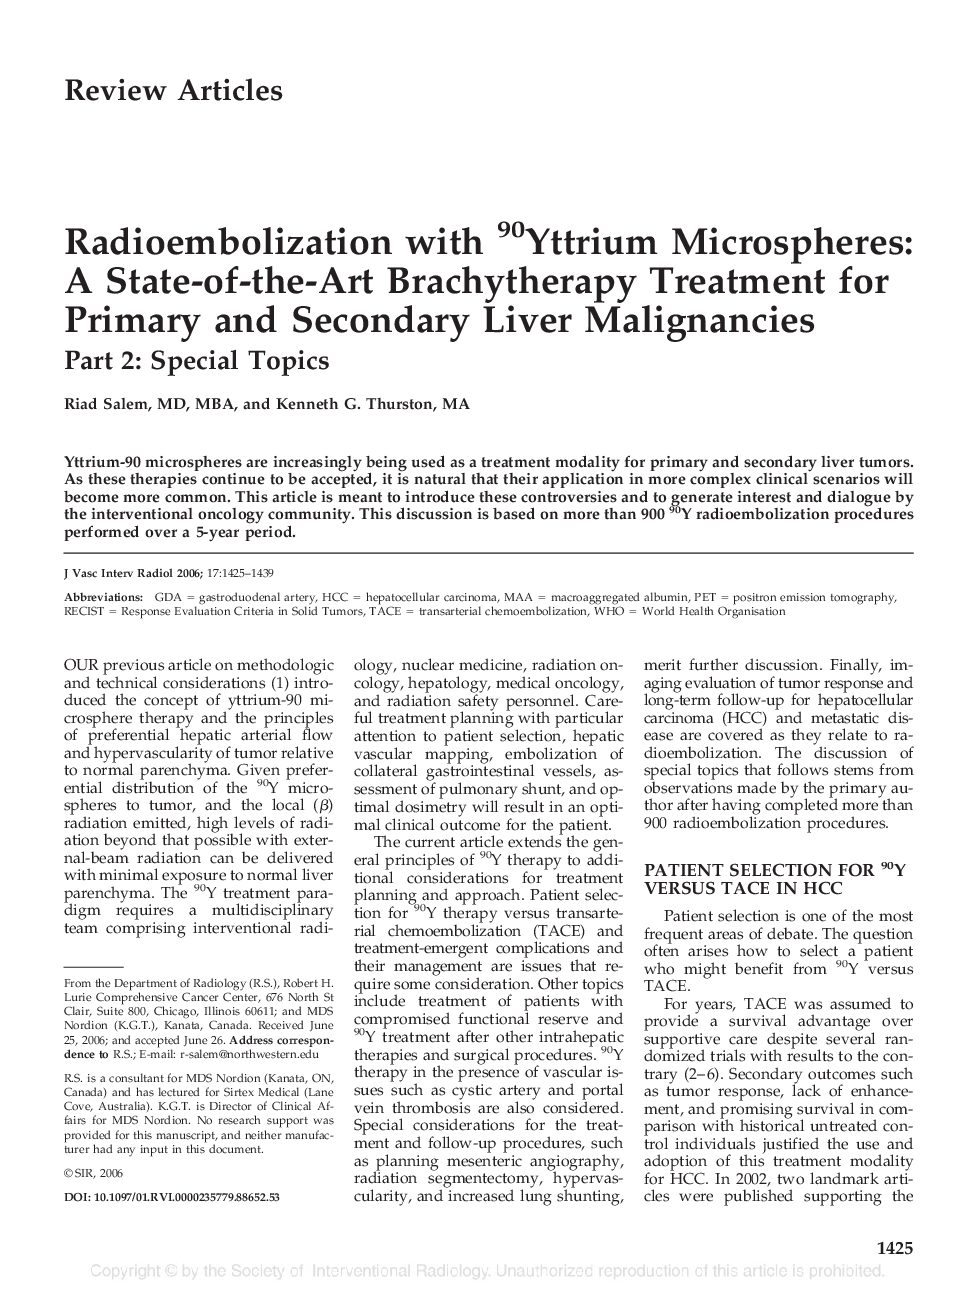 Radioembolization with 90Yttrium Microspheres: A State-of-the-Art Brachytherapy Treatment for Primary and Secondary Liver Malignancies